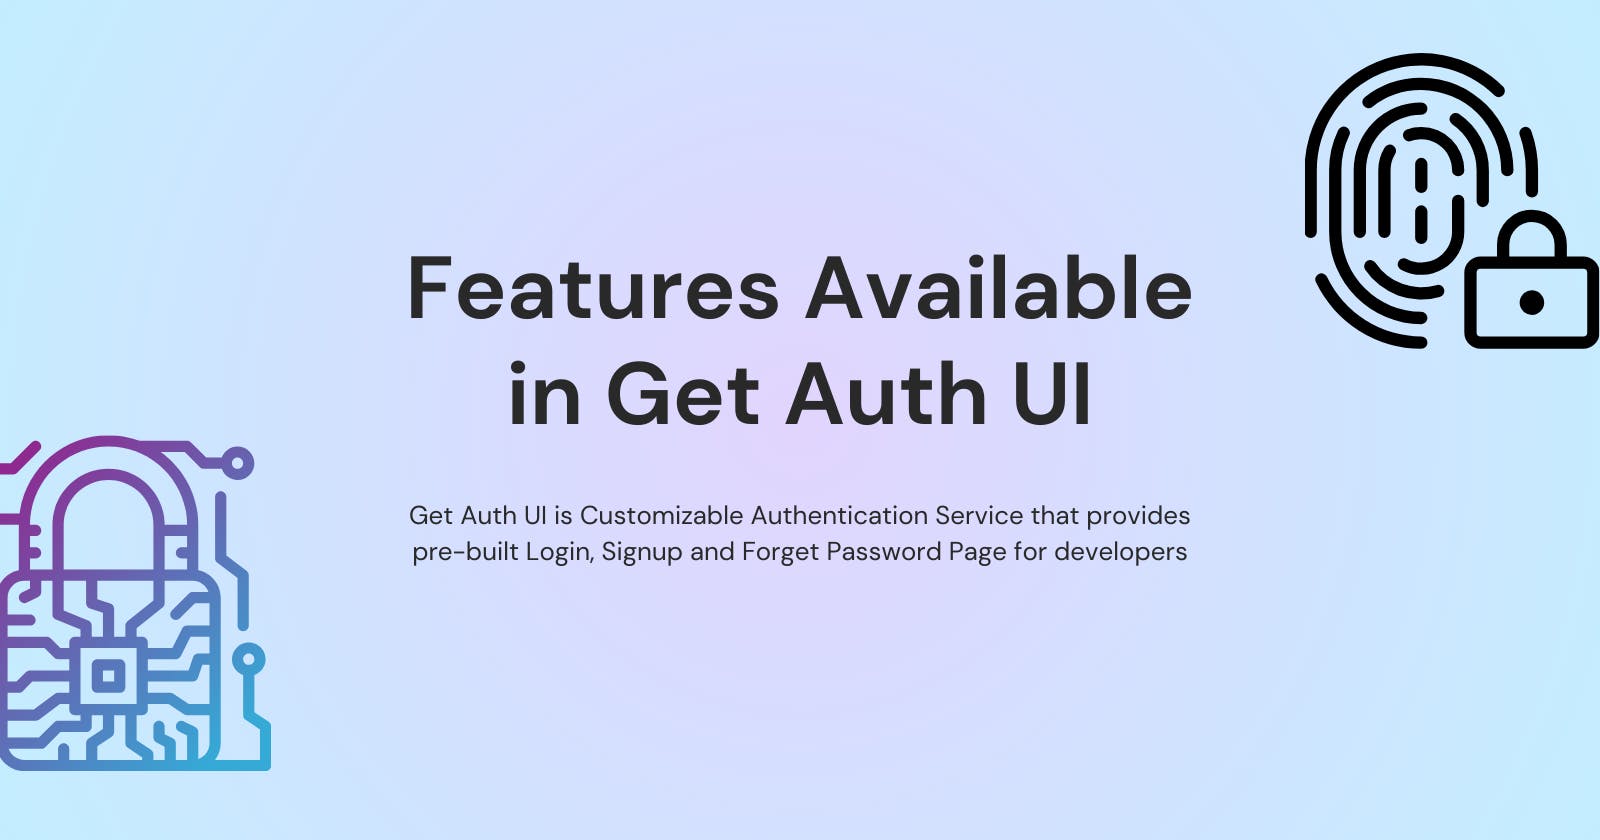 Features Available in Get Auth UI